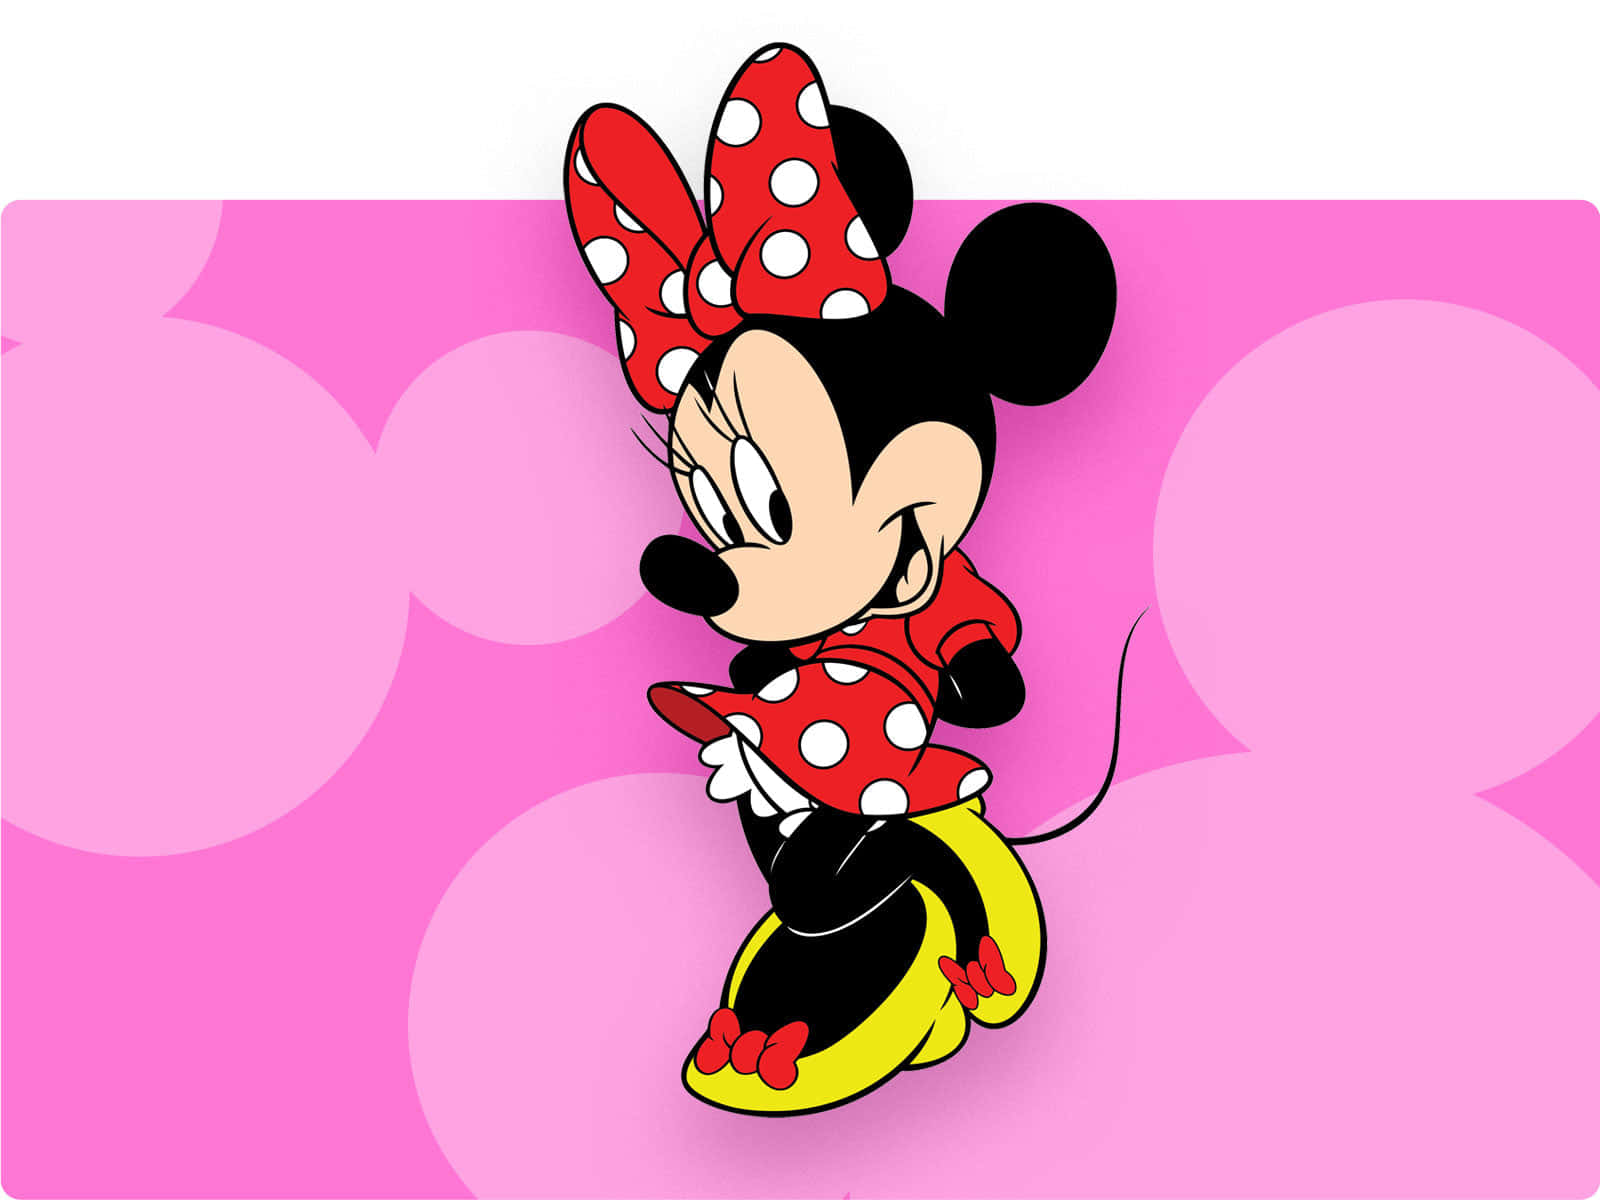 smiling Minnie Mouse with her signature bow.